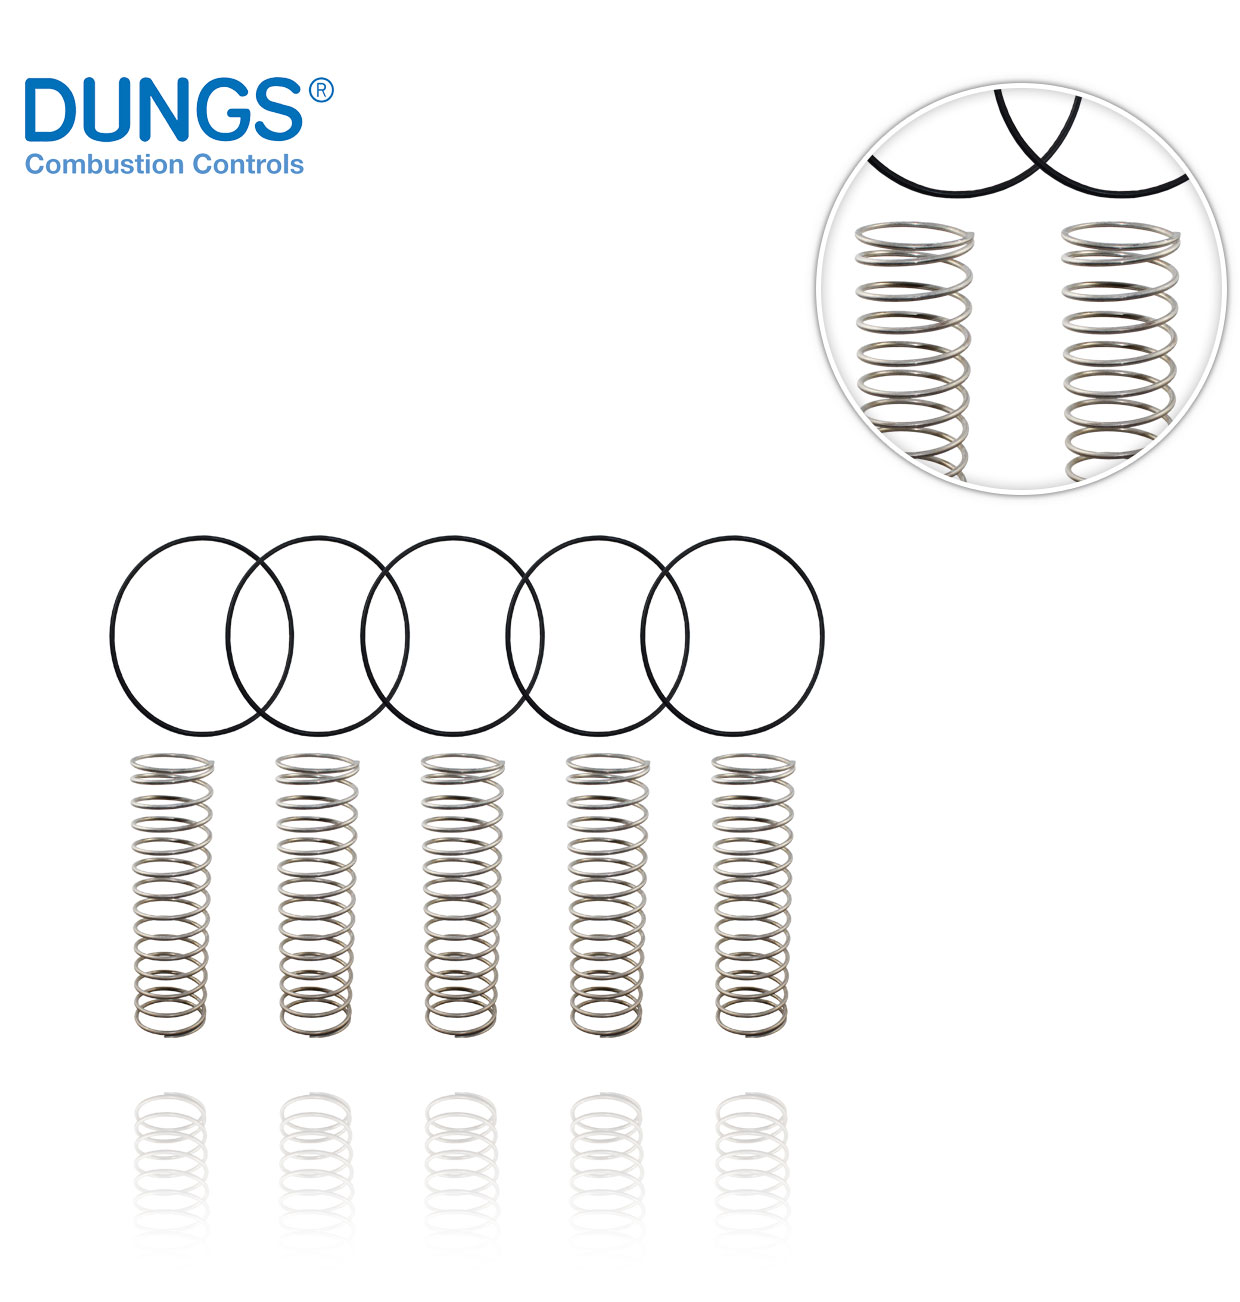 KIT MUELLES COMPENSACION (5uds.)  FRNG 5150  DN150 DUNGS 242712